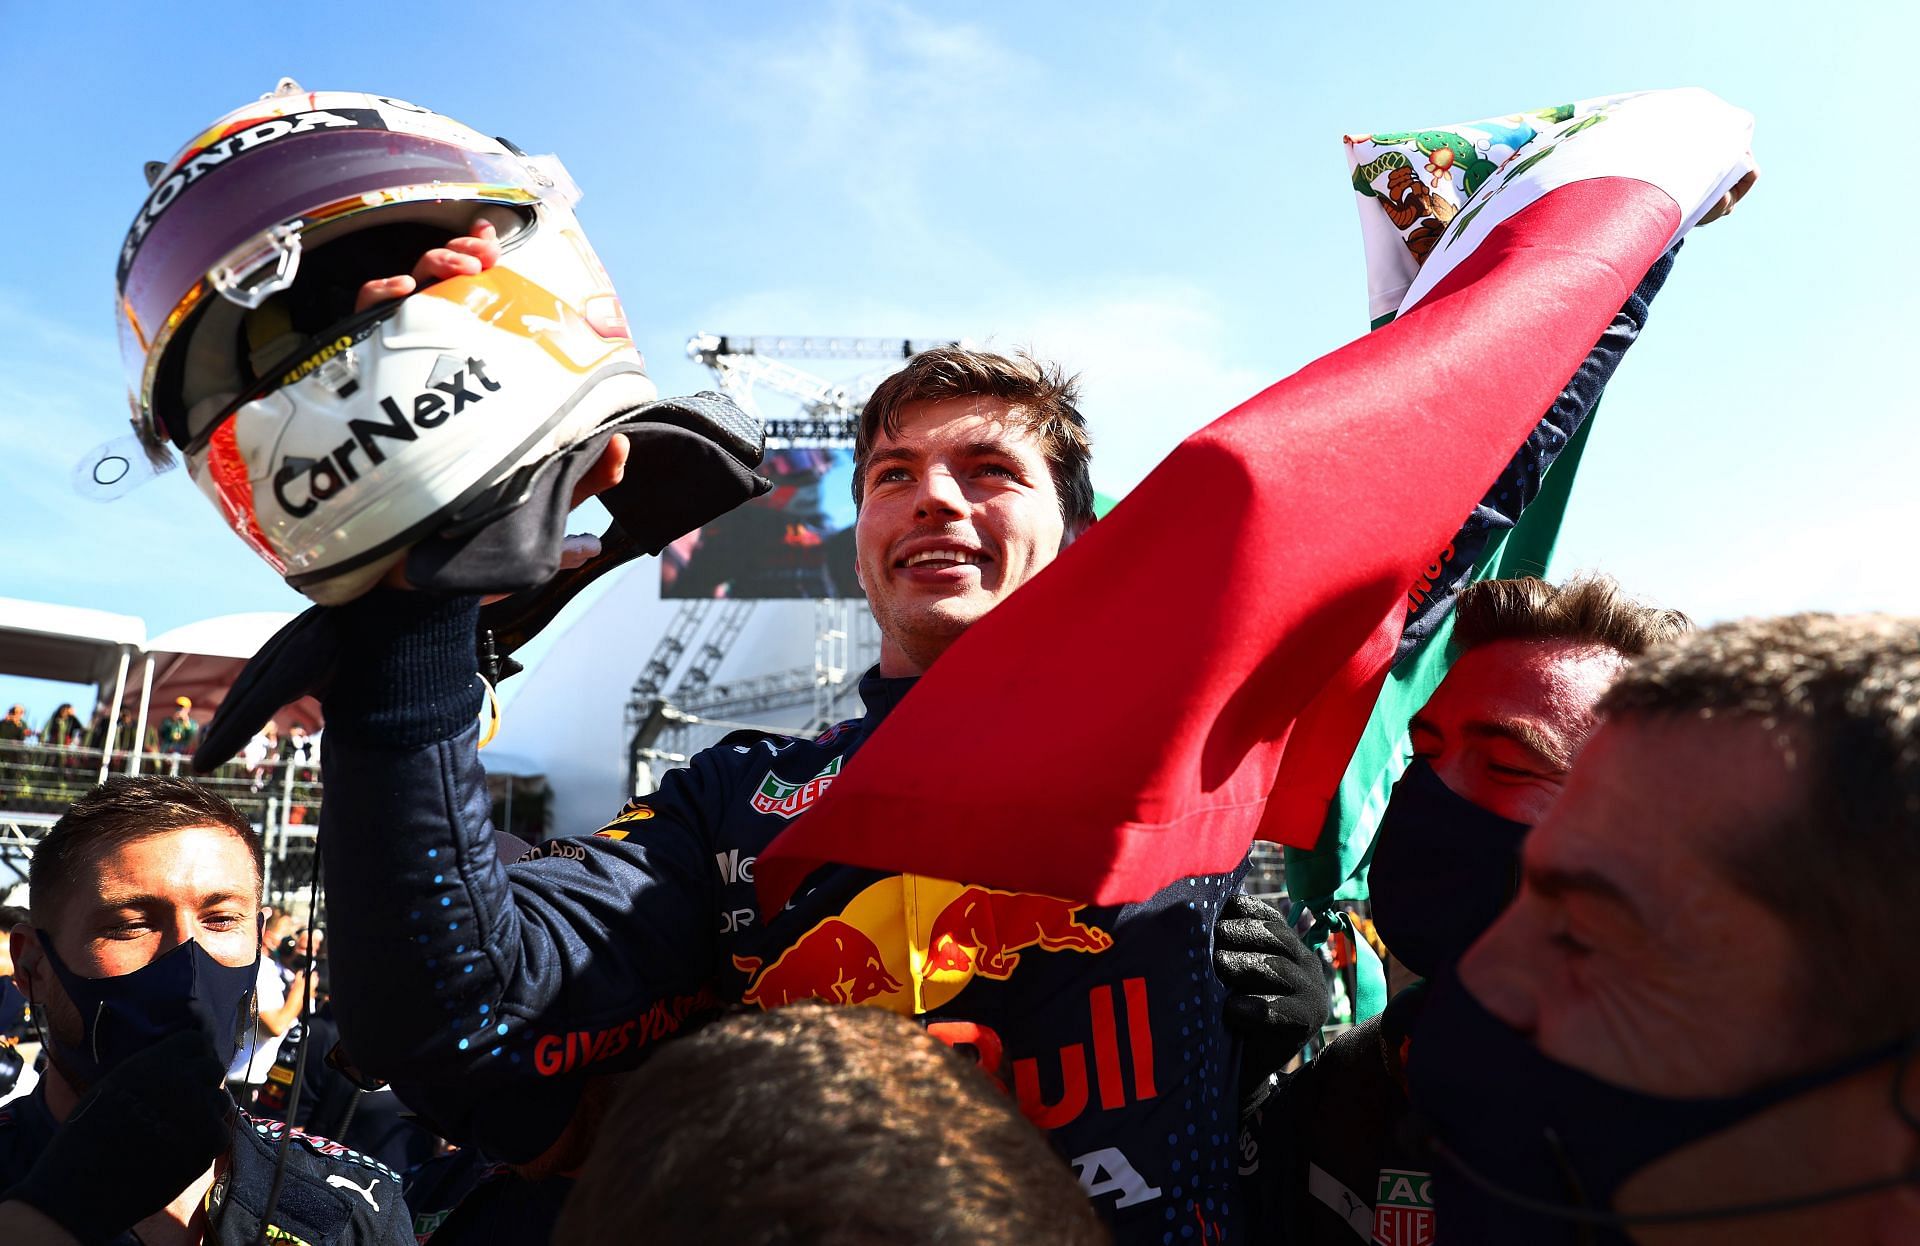 2021 Mexican GP winner Max Verstappen celebrates in parc ferme. (Photo by Mark Thompson/Getty Images)